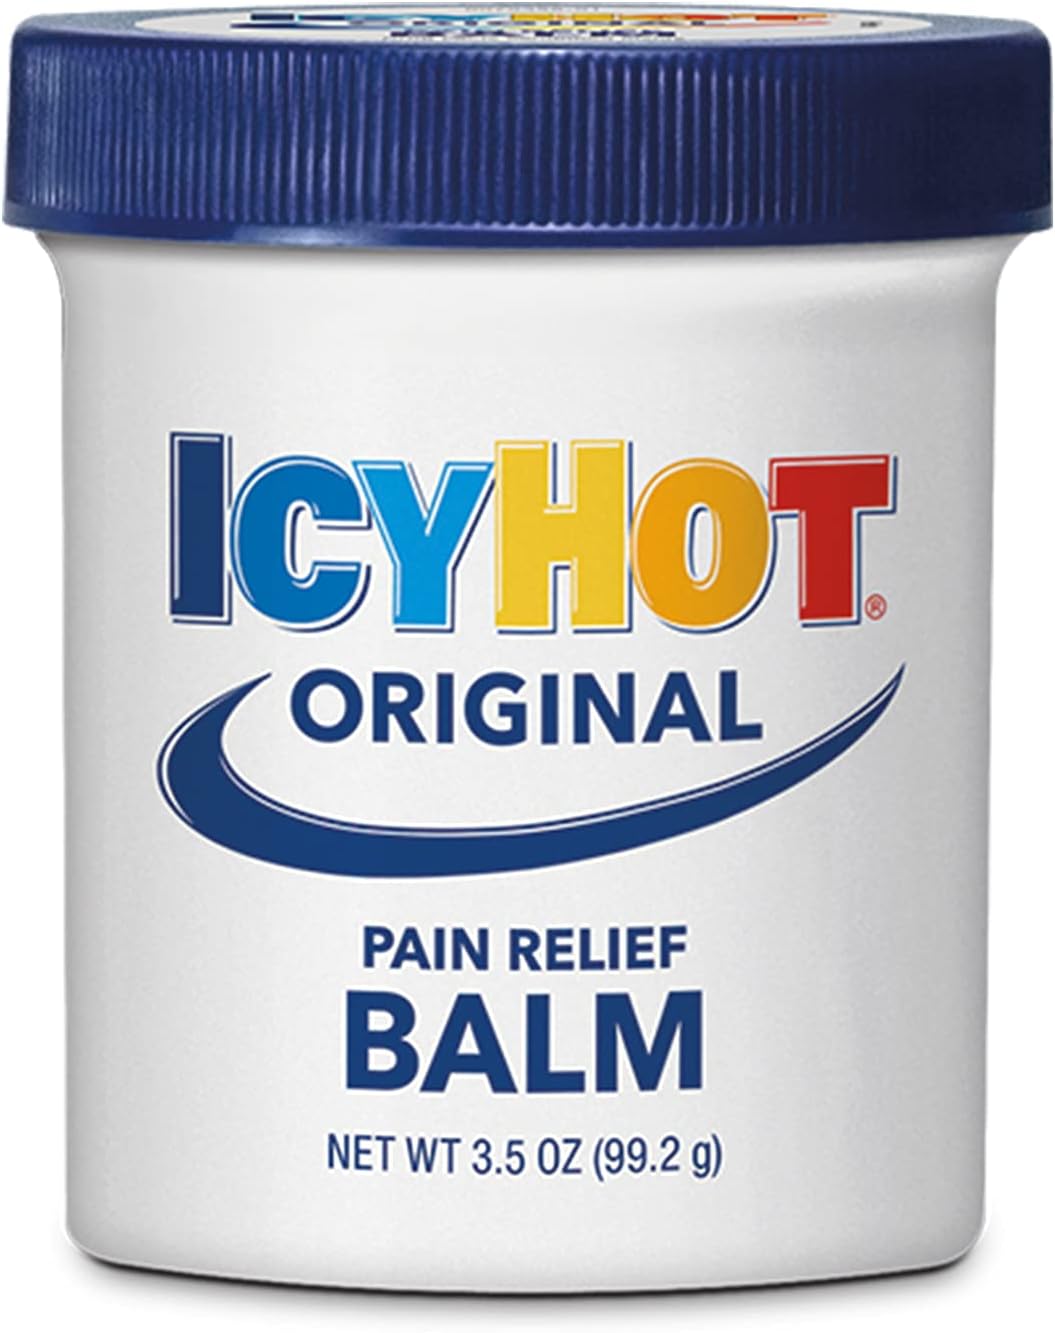 Icy Hot Original Pain Relieving Balm, 3.5 oz. (Pack of 4)